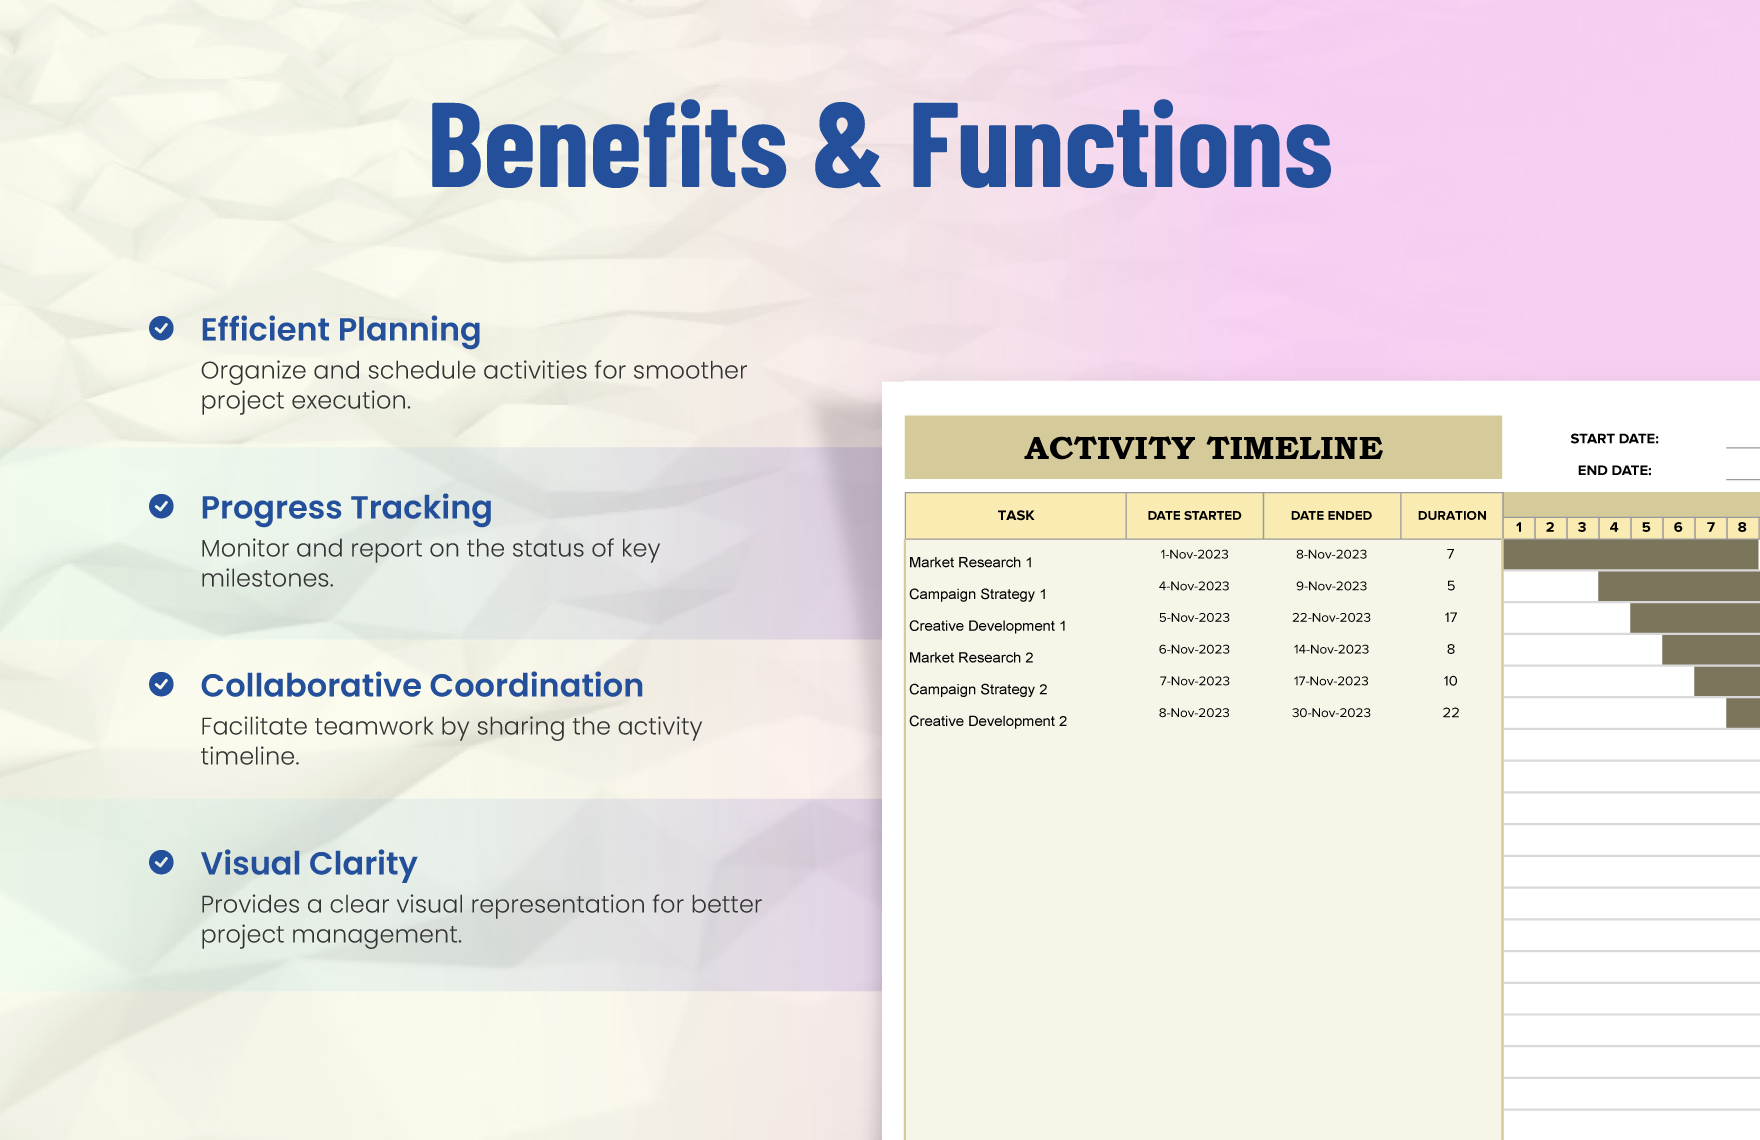 Activity Timeline Template